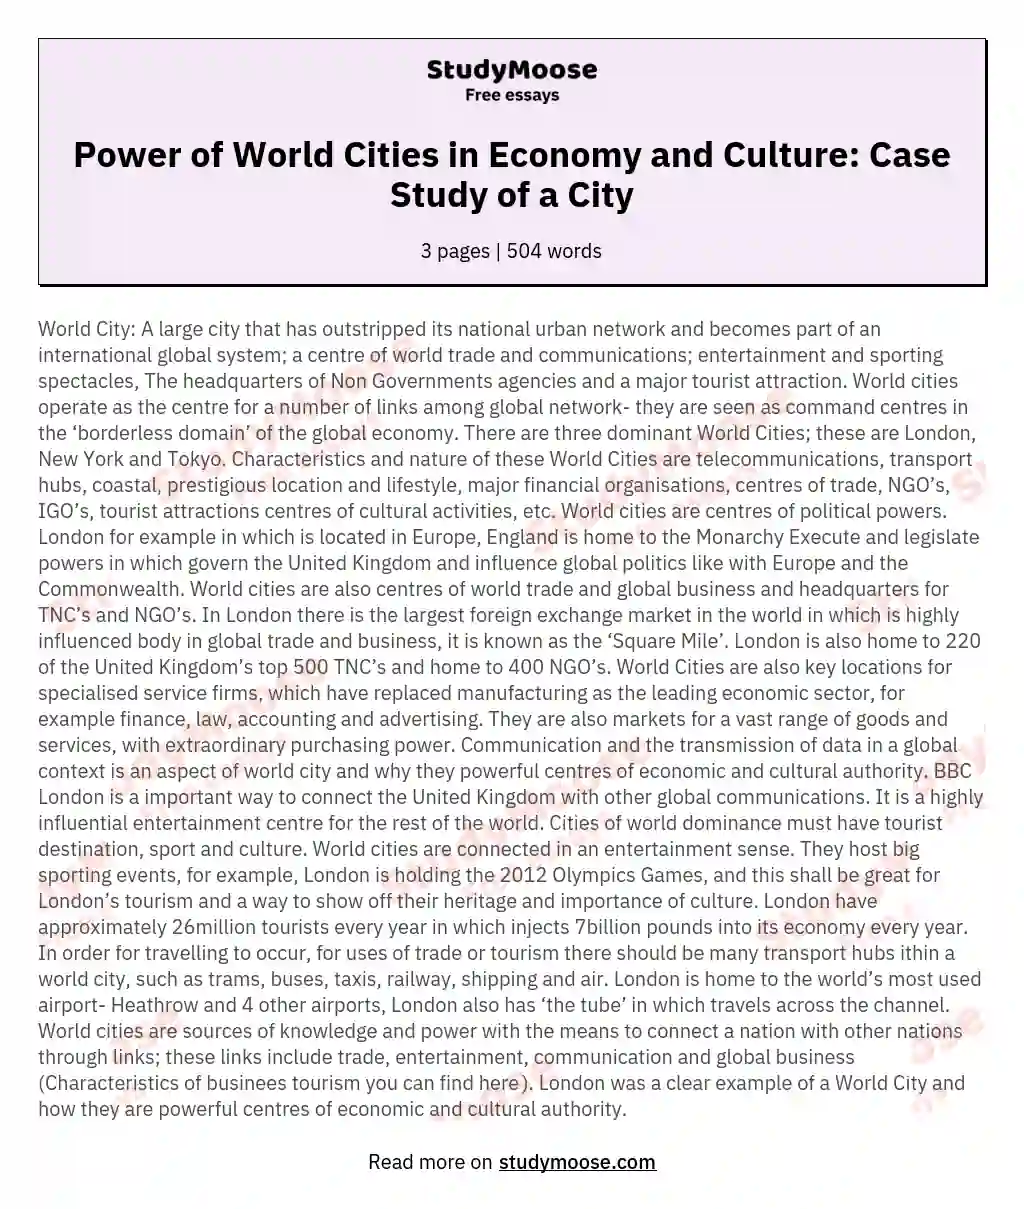 Power of World Cities in Economy and Culture: Case Study of a City